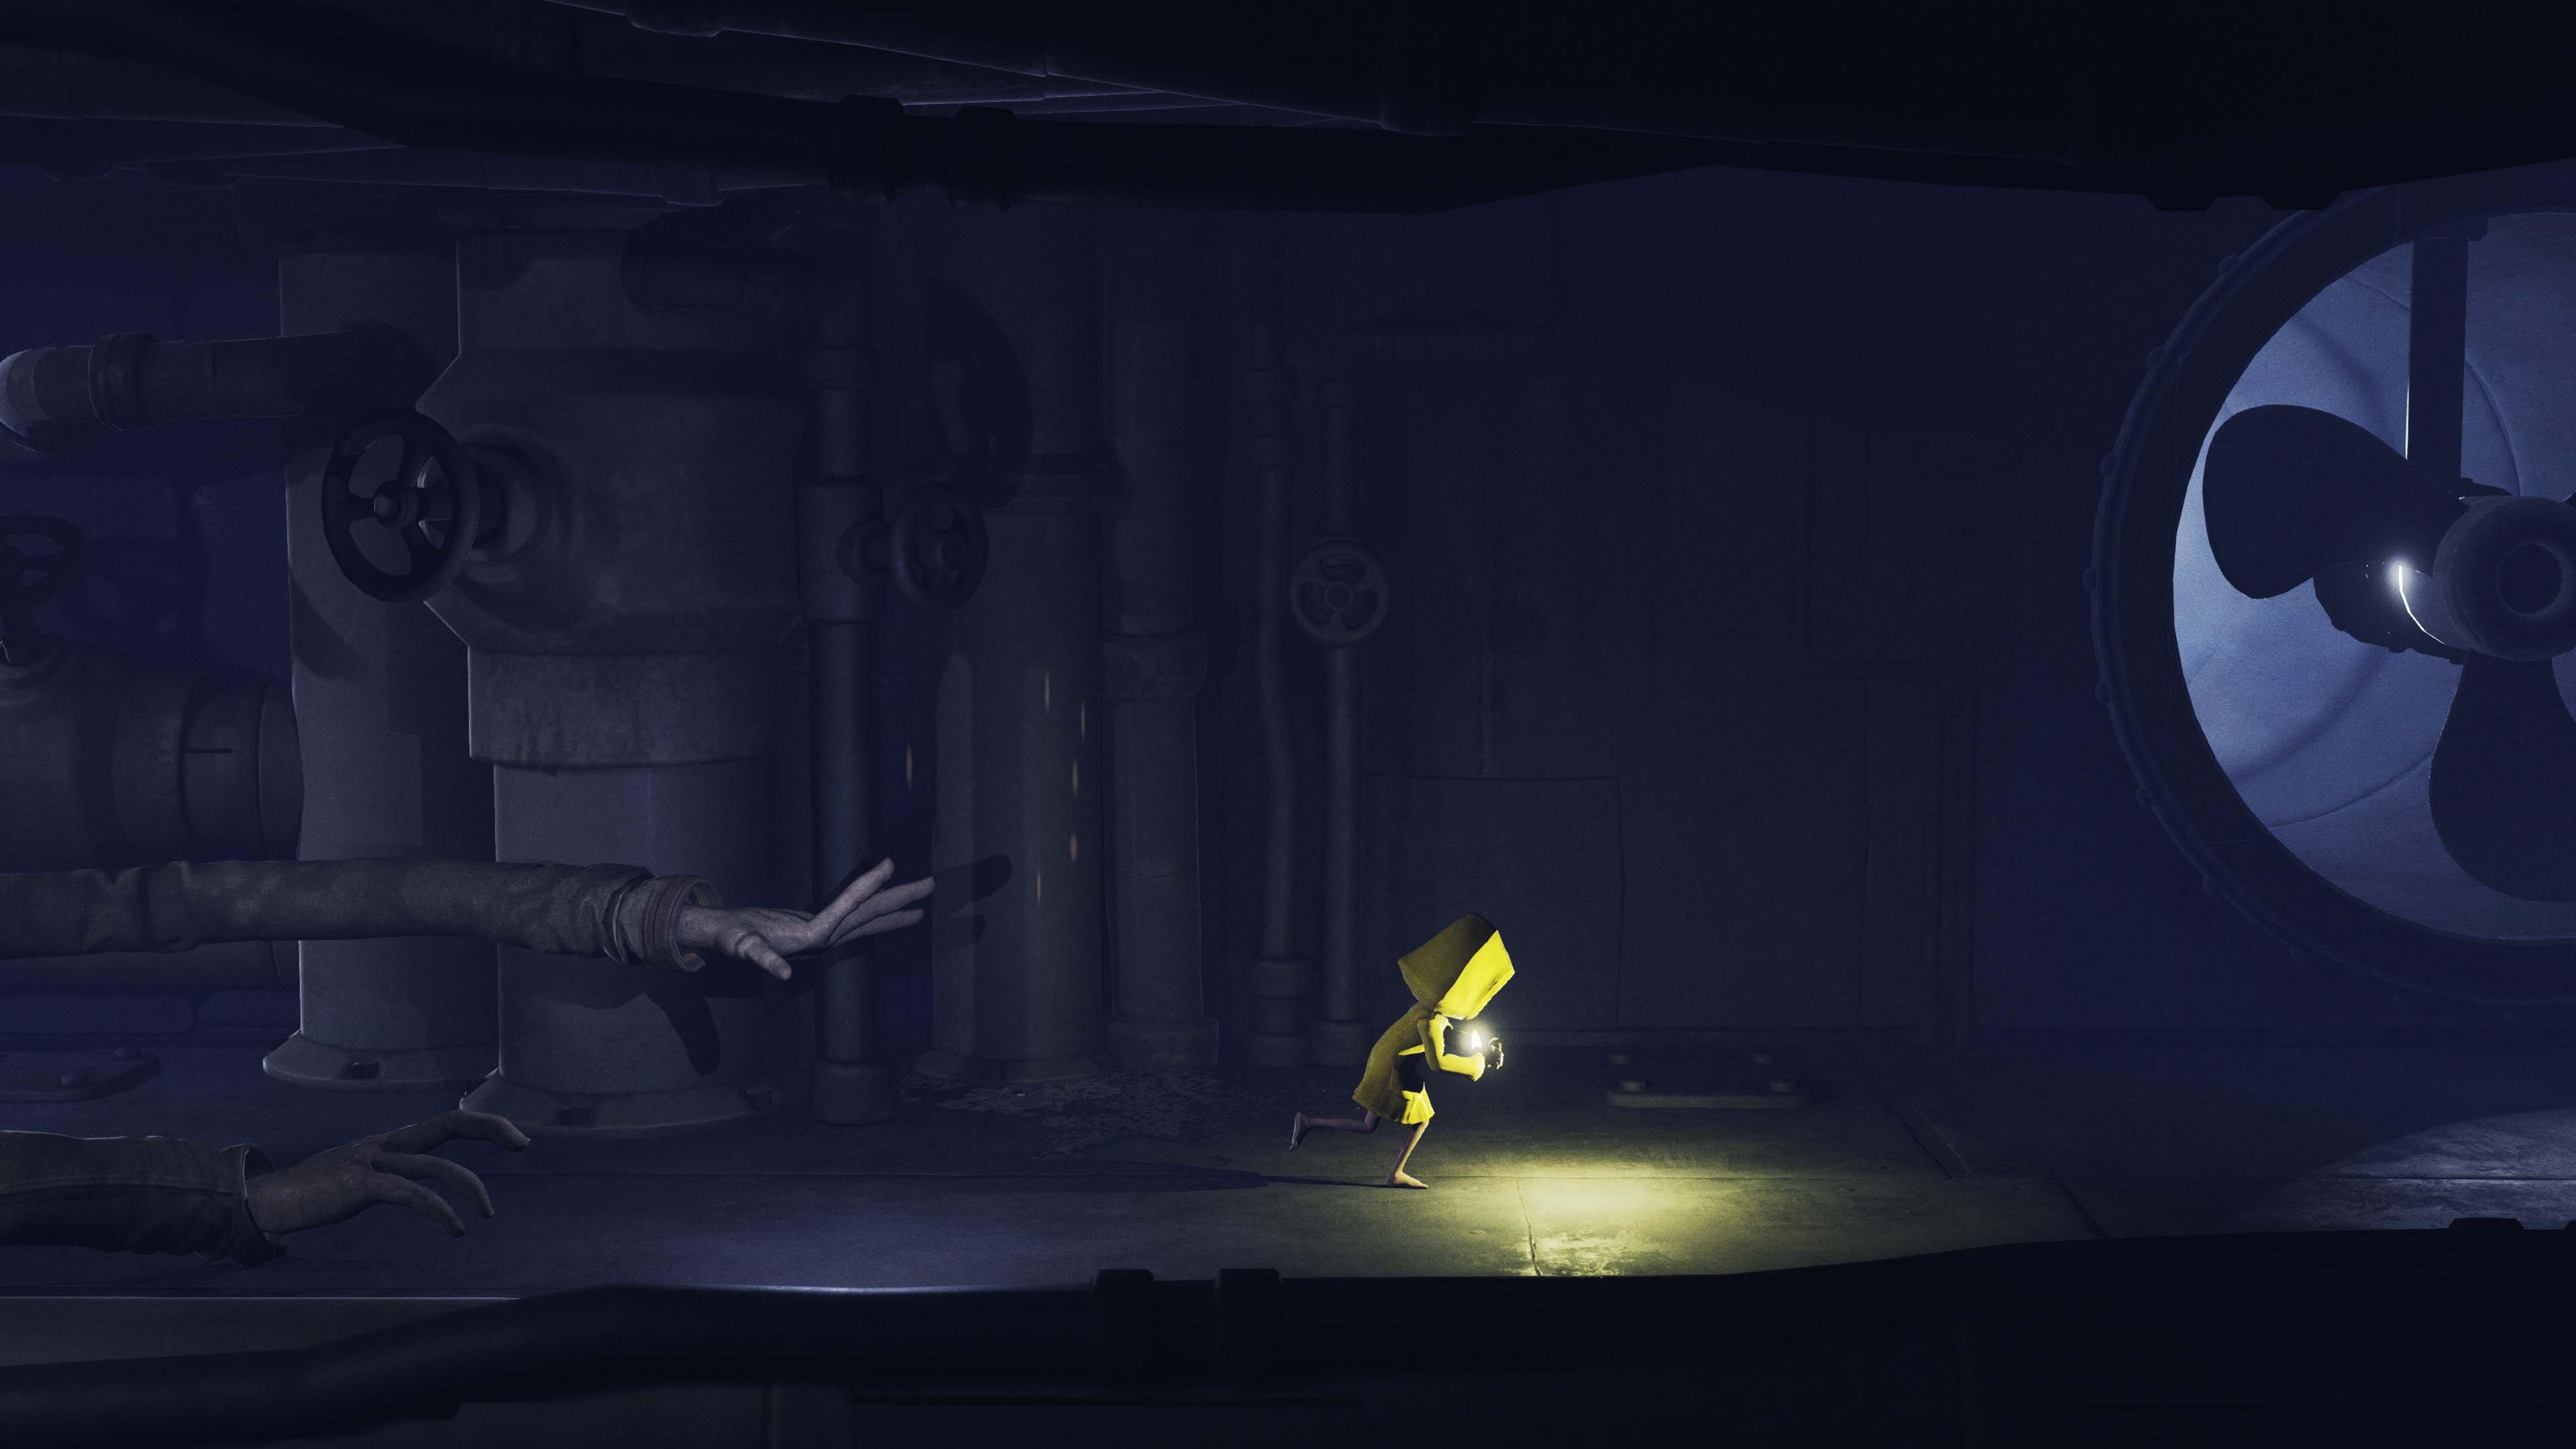 PlayStation 4 : Little Nightmares 2 PS4 - Standard Edition VideoGames